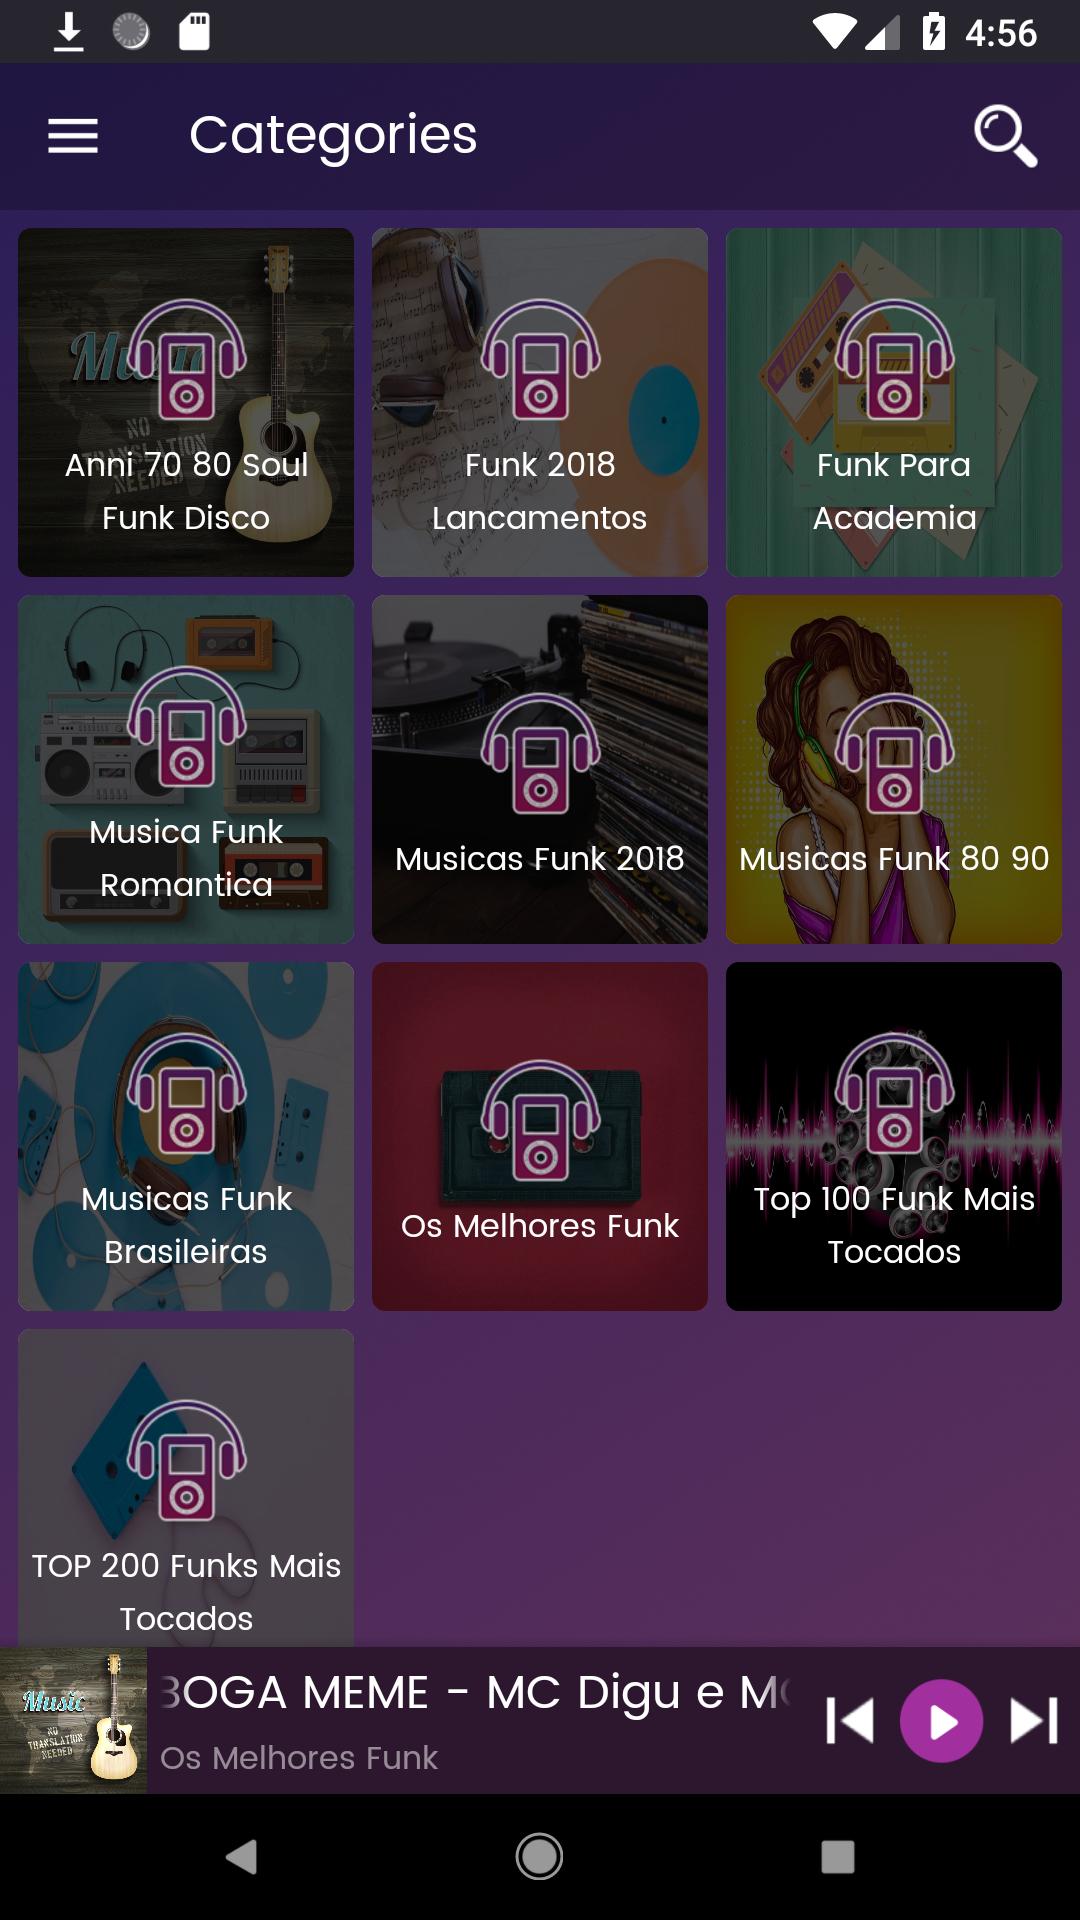 Os Melhores Funk 2018 for Android - APK Download